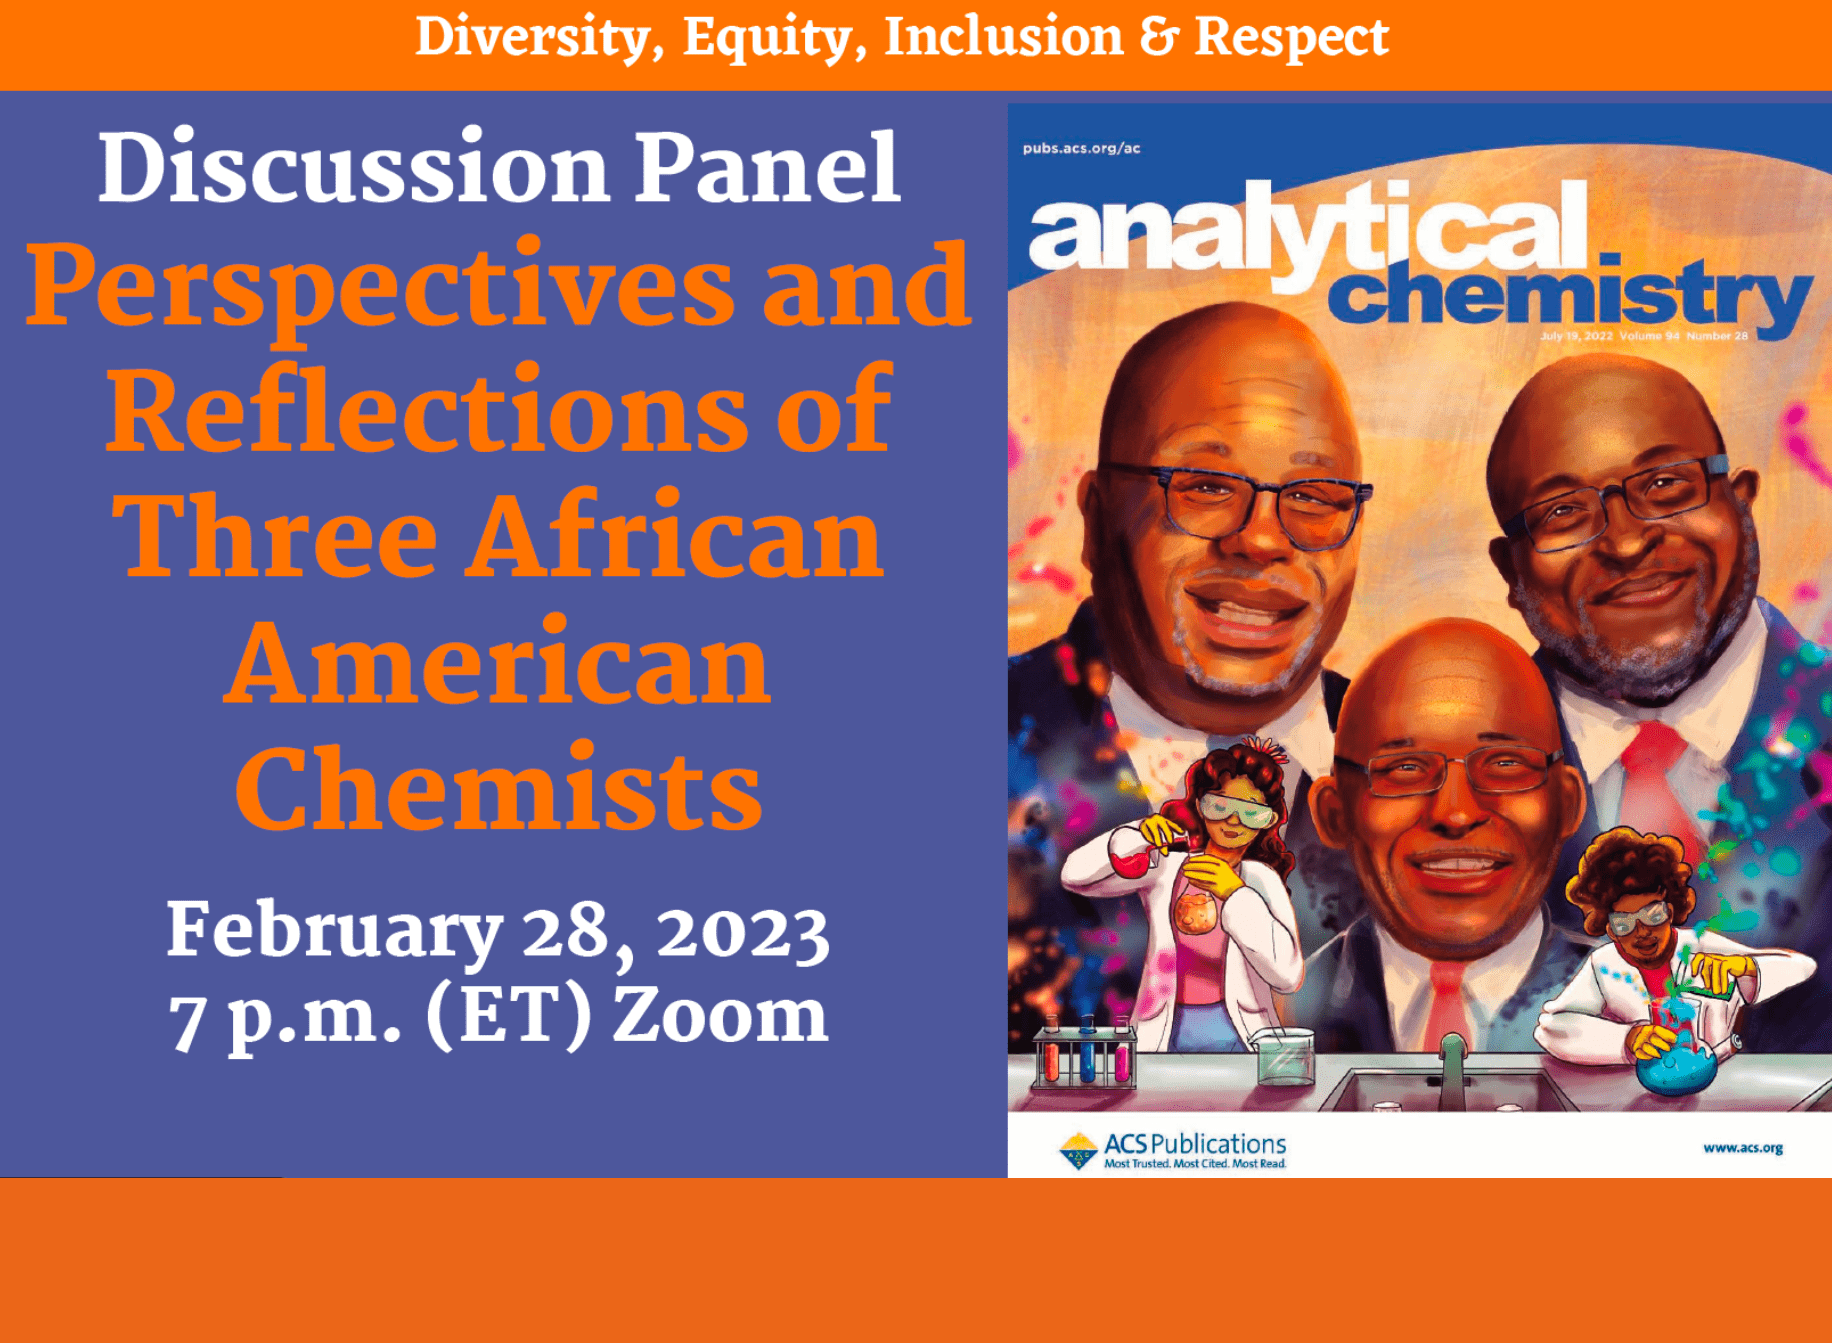 "Perspectives and Reflections of Three African American Chemists" February 28, 2023  7:00 PM (ET) Zoom